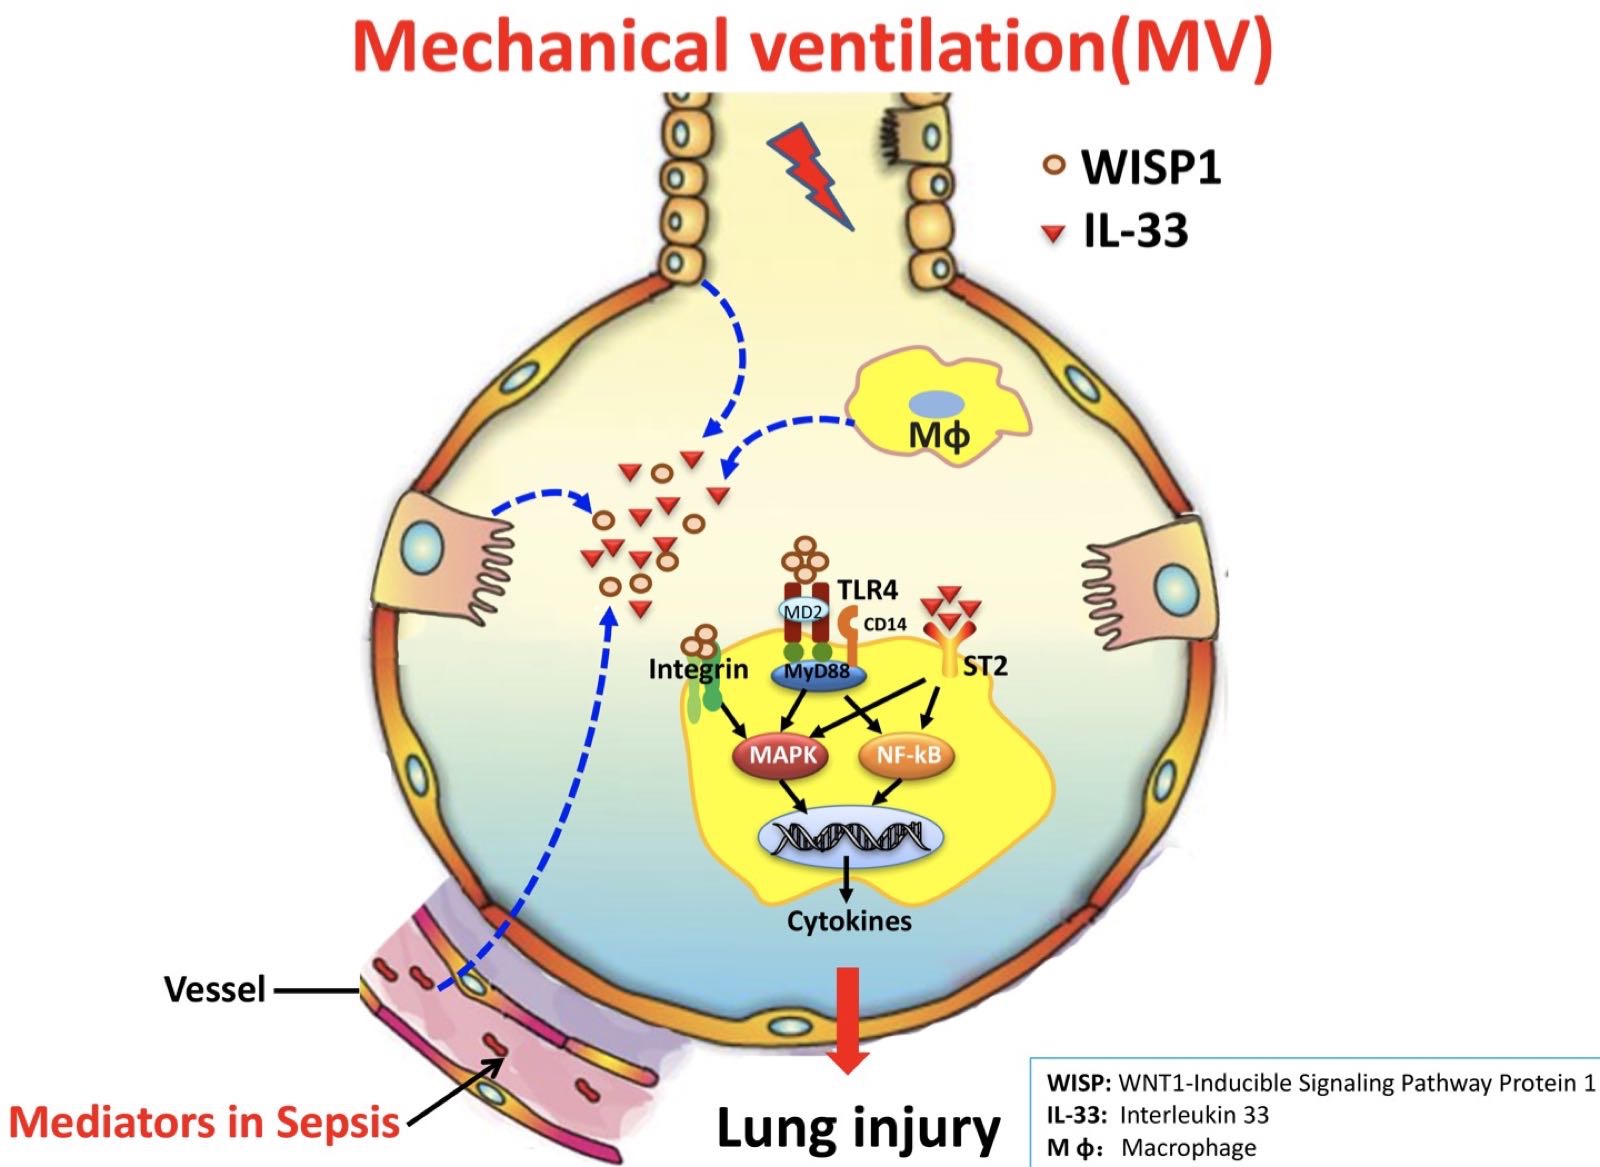 "A graphic depiction of mechanical ventilation and a lung injury"